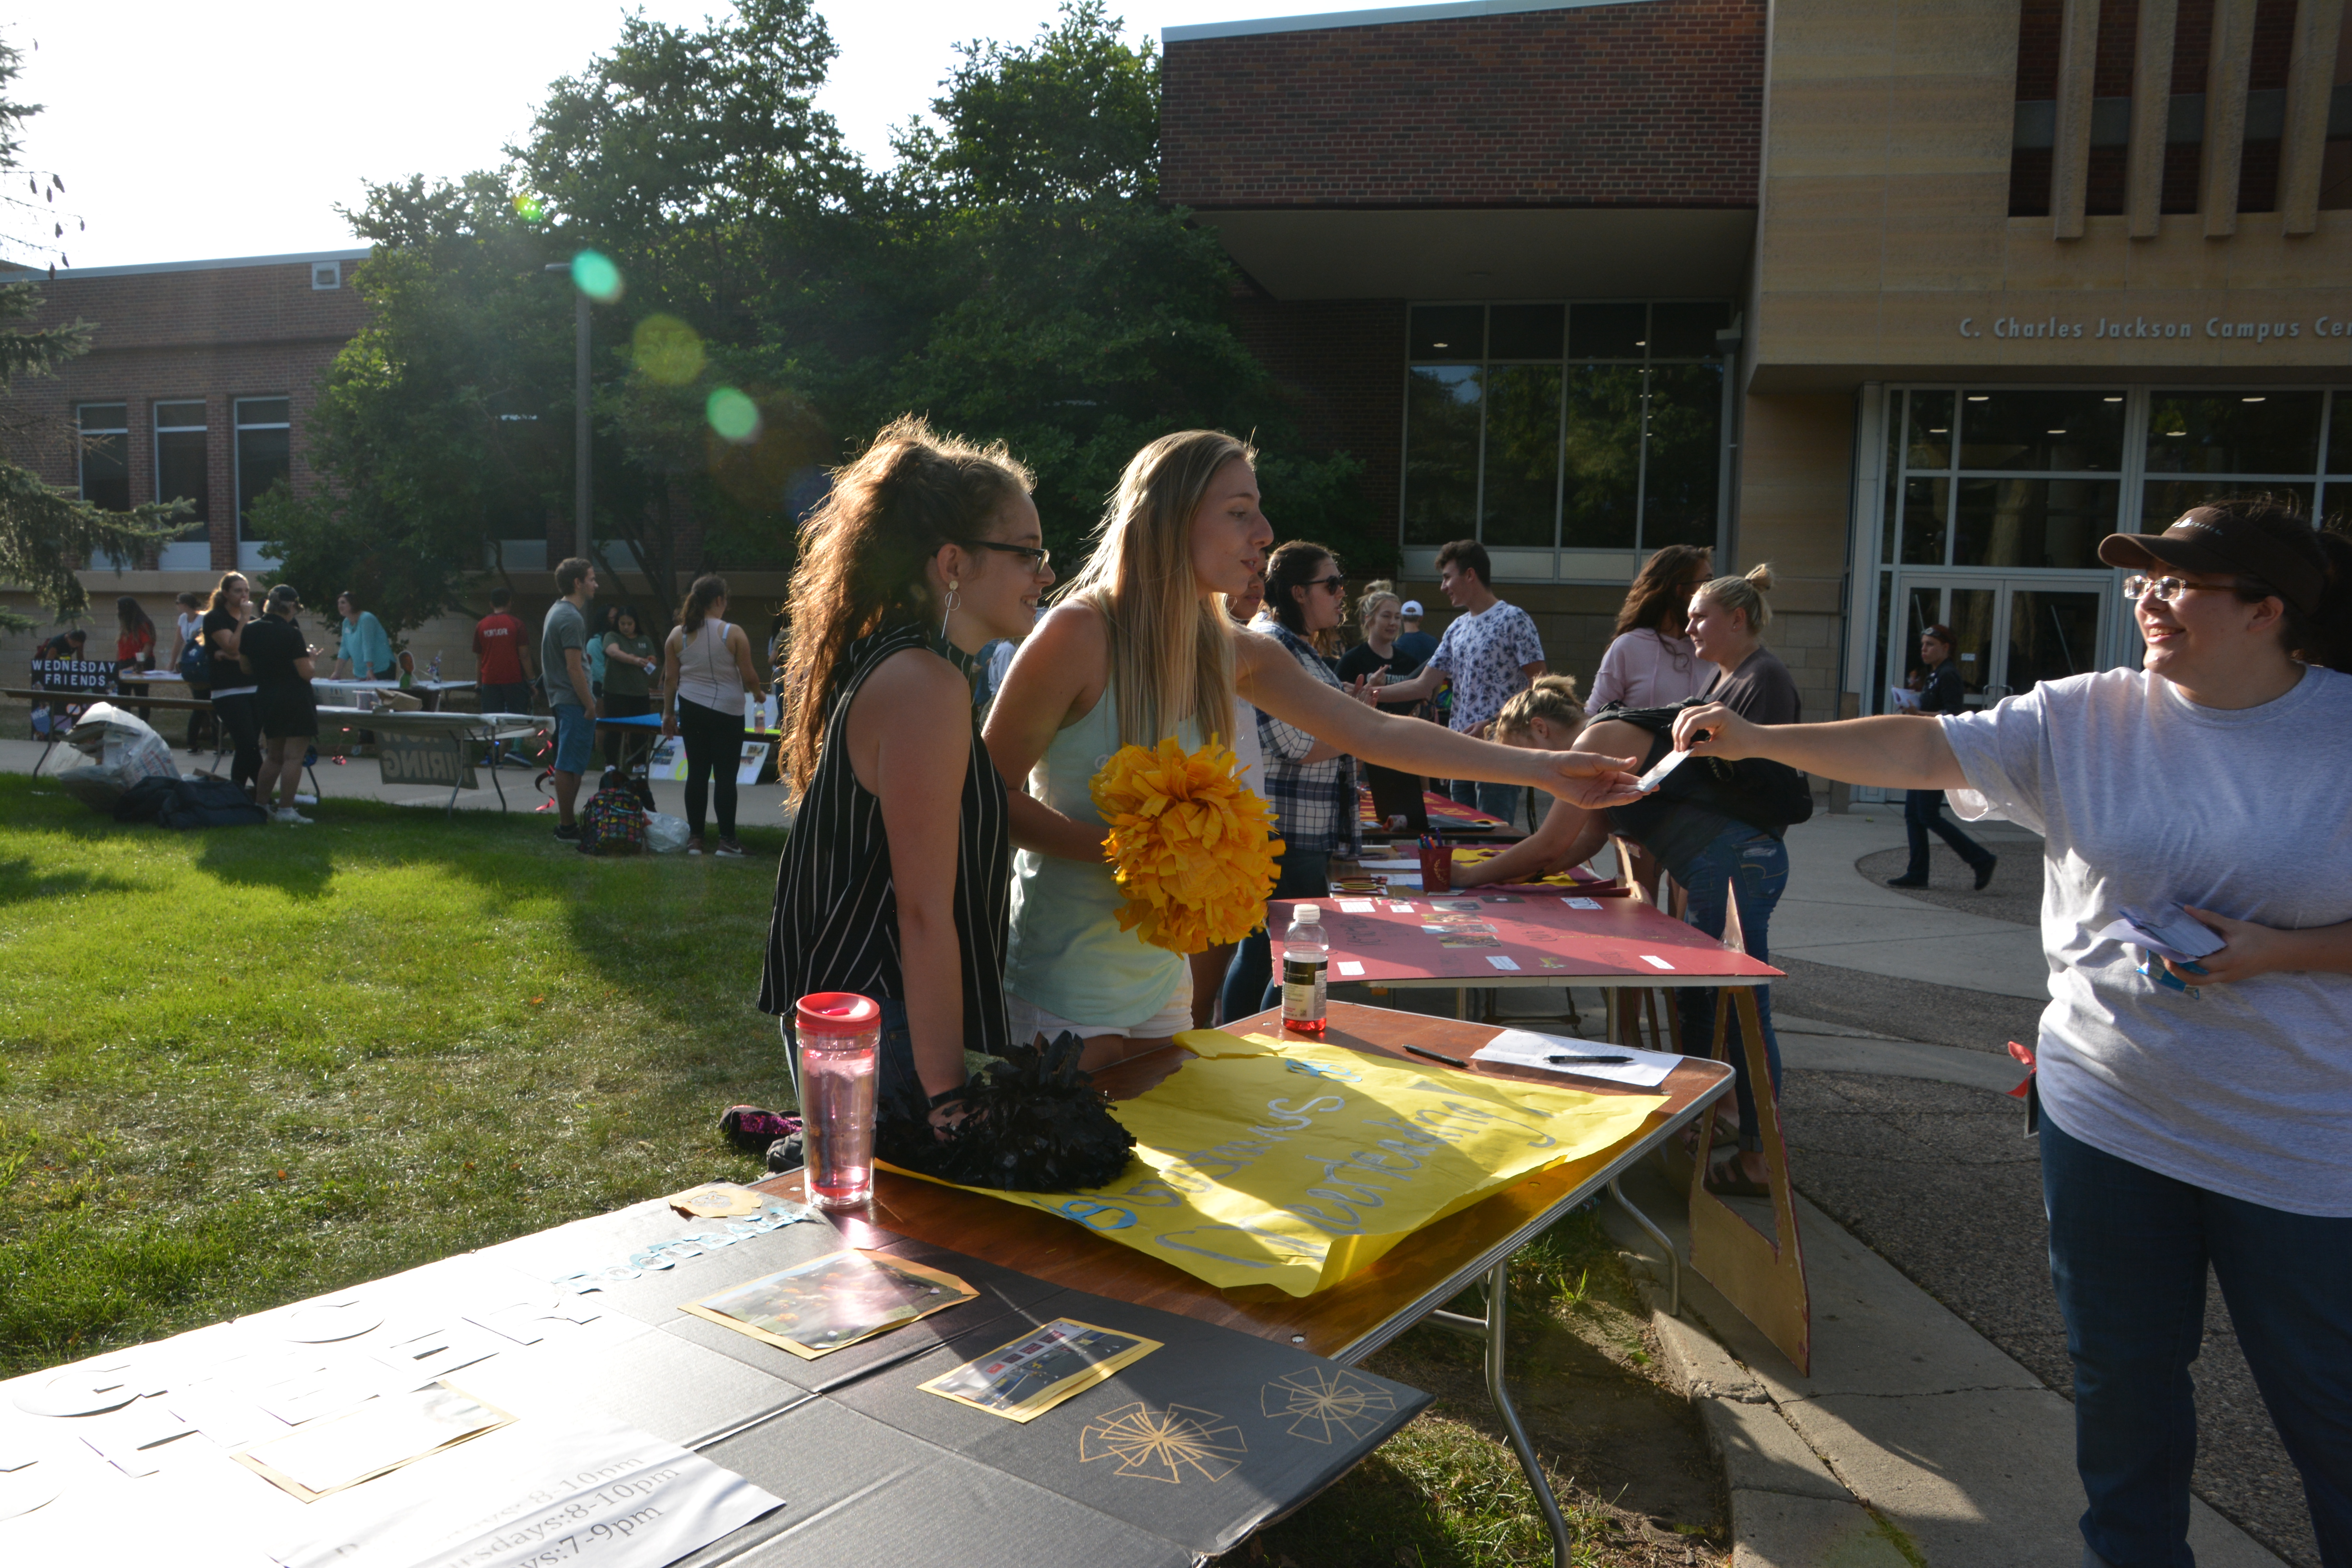 Gustavus Cheerleading was among the many groups participating in the involvement fair.